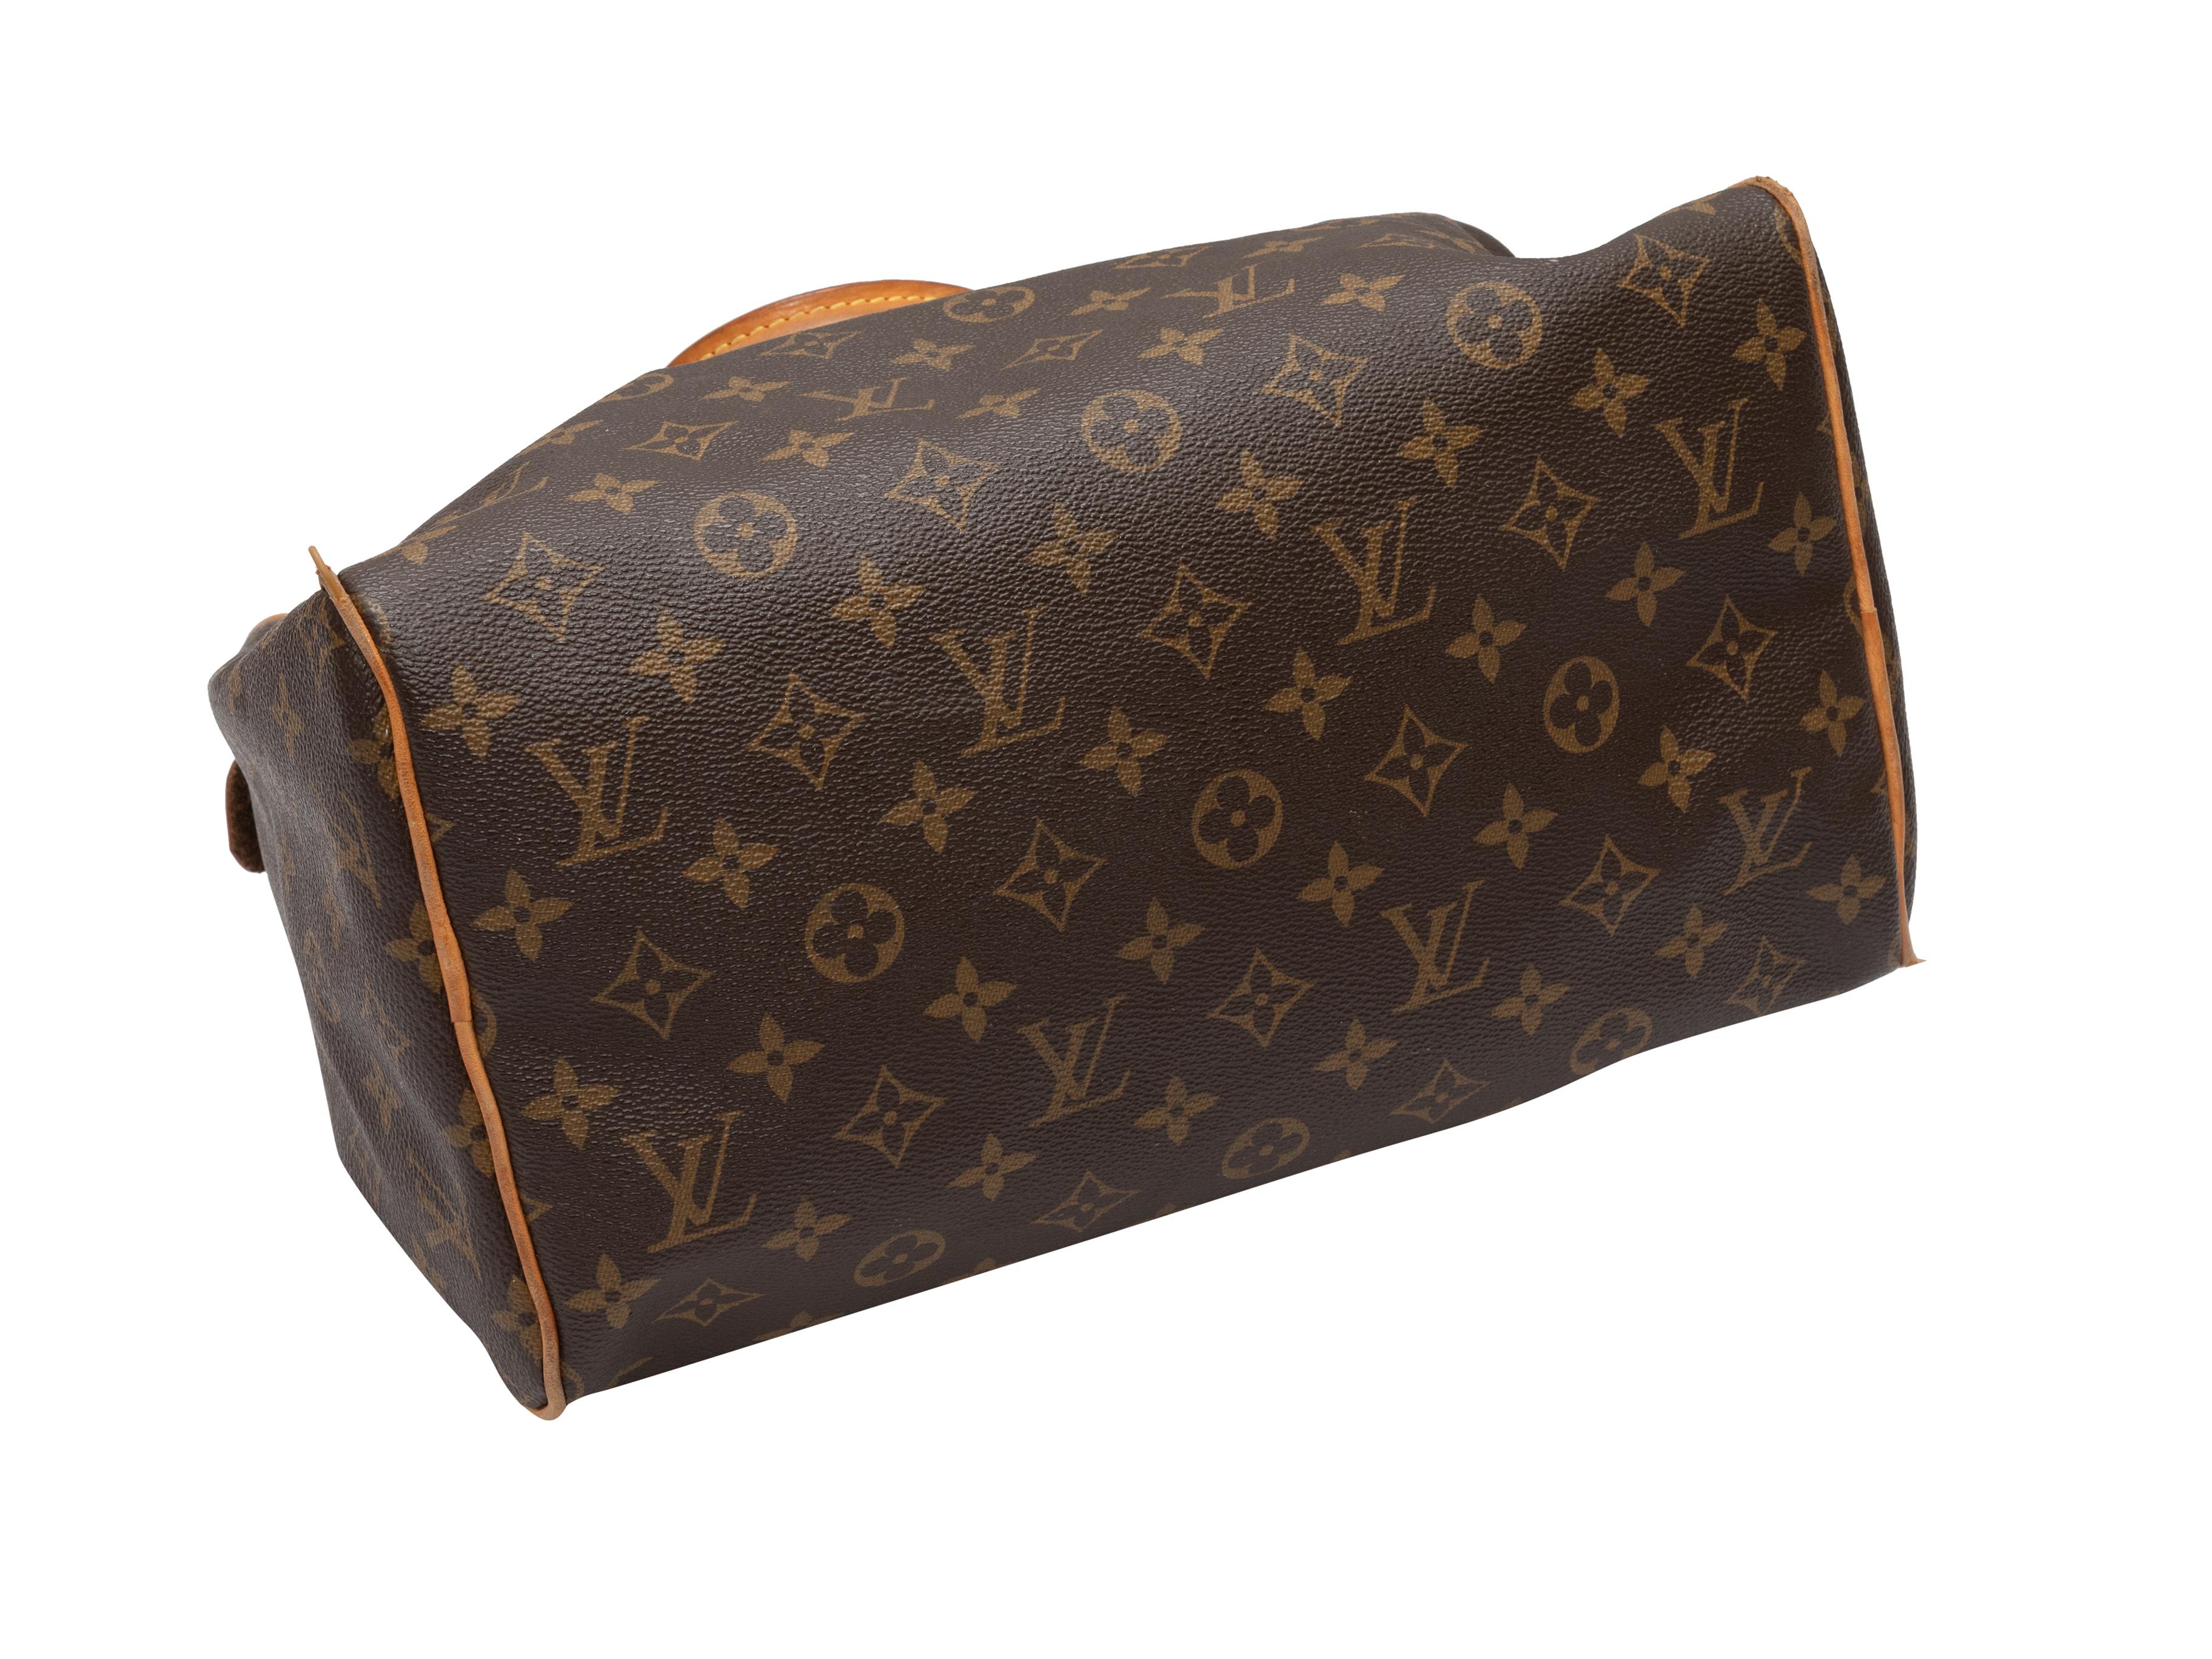 Brown Louis Vuitton 2008 Monogram Speedy 25 Bag. The Speedy 25 Bag features a coated canvas body, gold-tone hardware, dual rolled top handles, and a top zip closure. 12.5